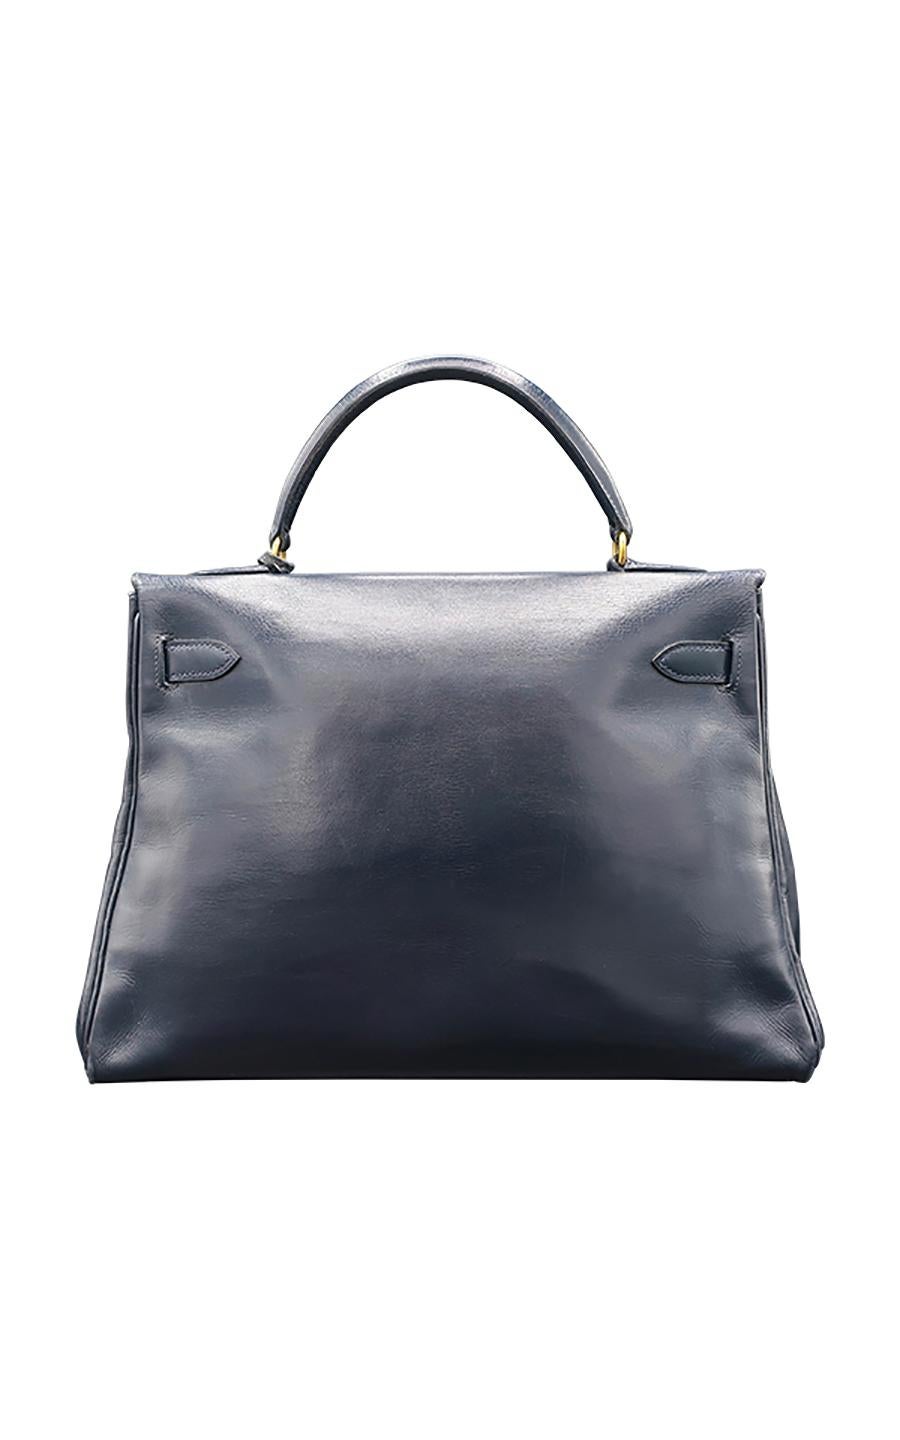 An extraordinary Hermès Kelly bag in navy leather, in excellent pre-loved condition. This classic, yet ever modern bag comes in a perfect, most sought-after size of 32 cm. It provides almost as much space as Birkin 30 cm, while lending a flawless